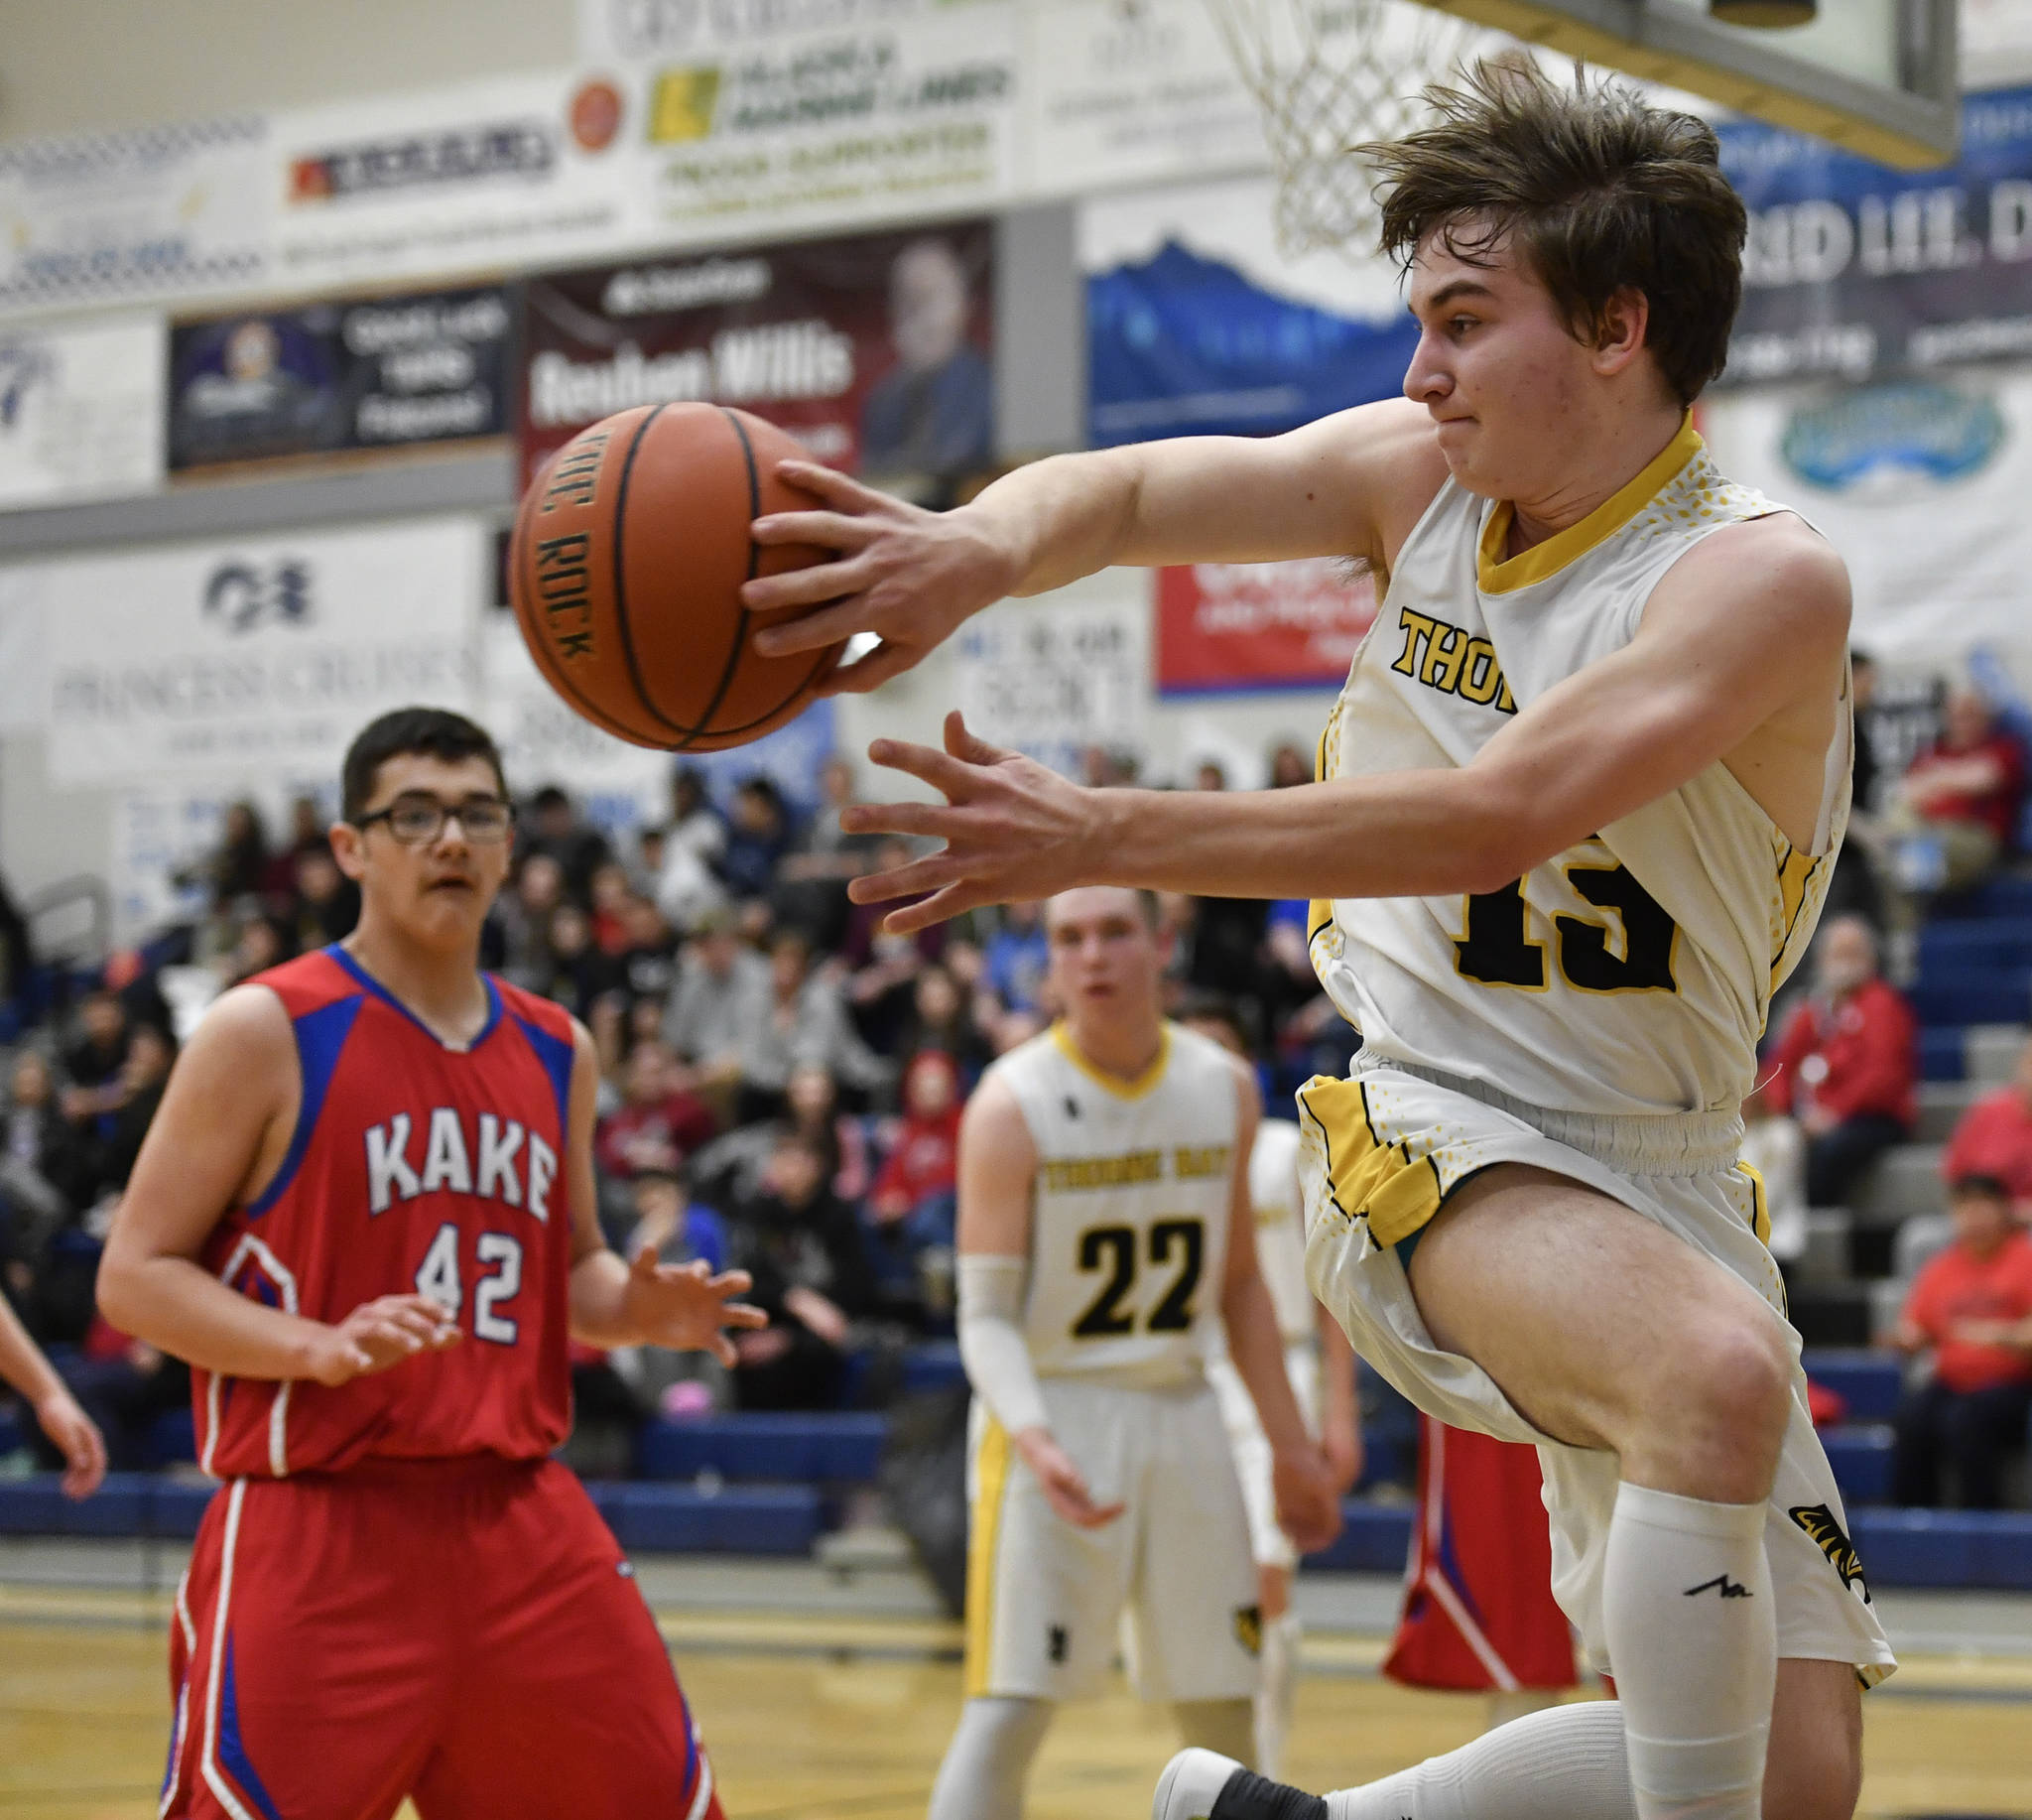 Thorne Bay’s Joseph Vondoloski saves a ball from going out of bounds against Kake in the final of the Region V 1A Basketball Championships at Thunder Mountain High School on Friday, March 1, 2019. Thorne Bay won 55-44. (Michael Penn | Juneau Empire)